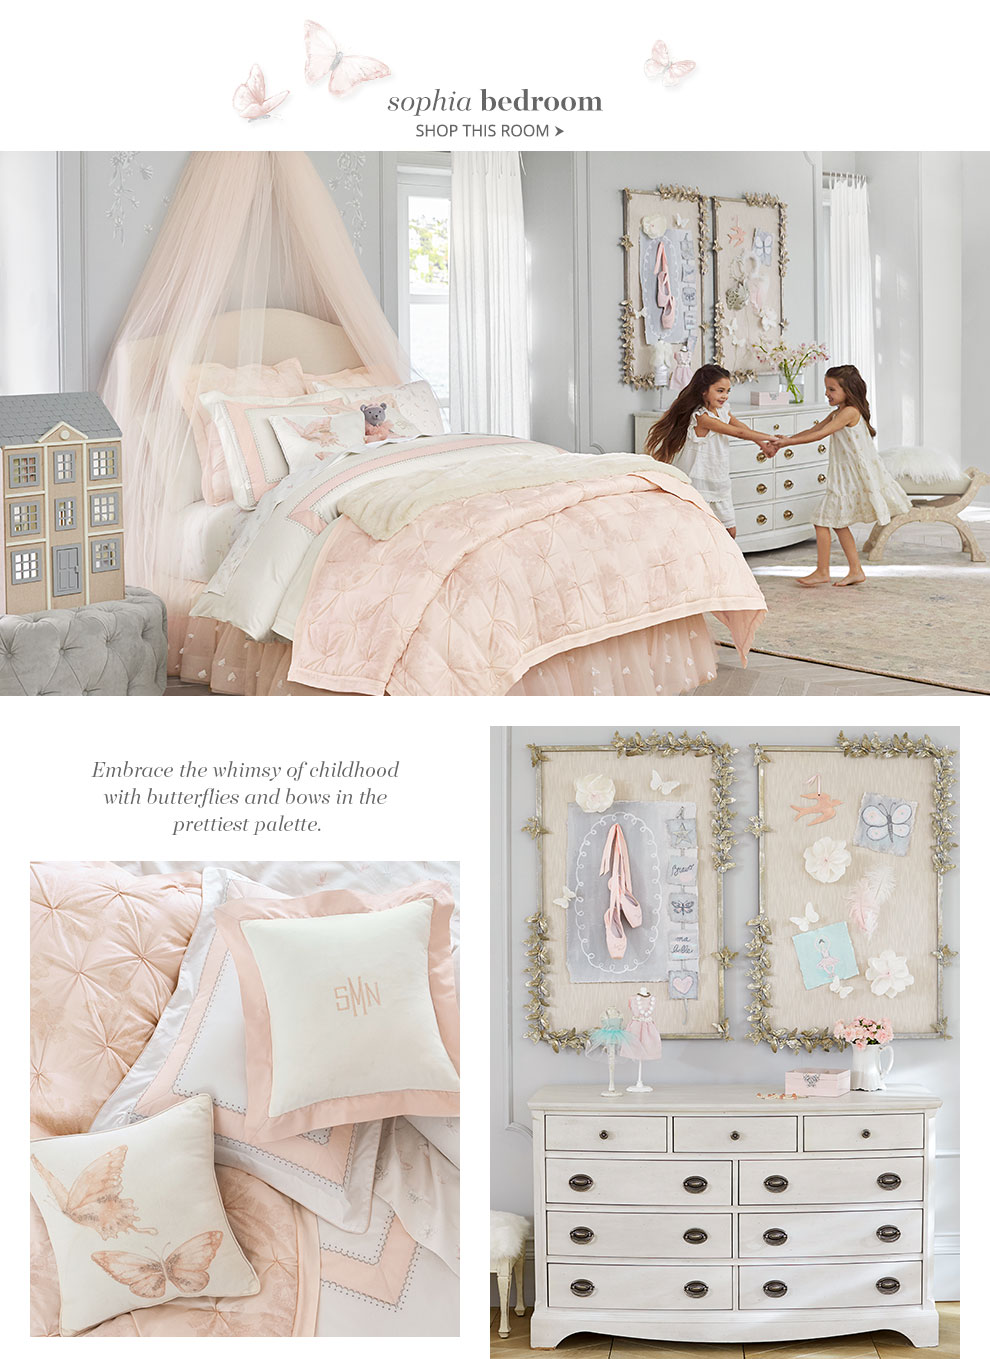 Monique Lhuillier's Collaboration With Pottery Barn Kids is Beyond 